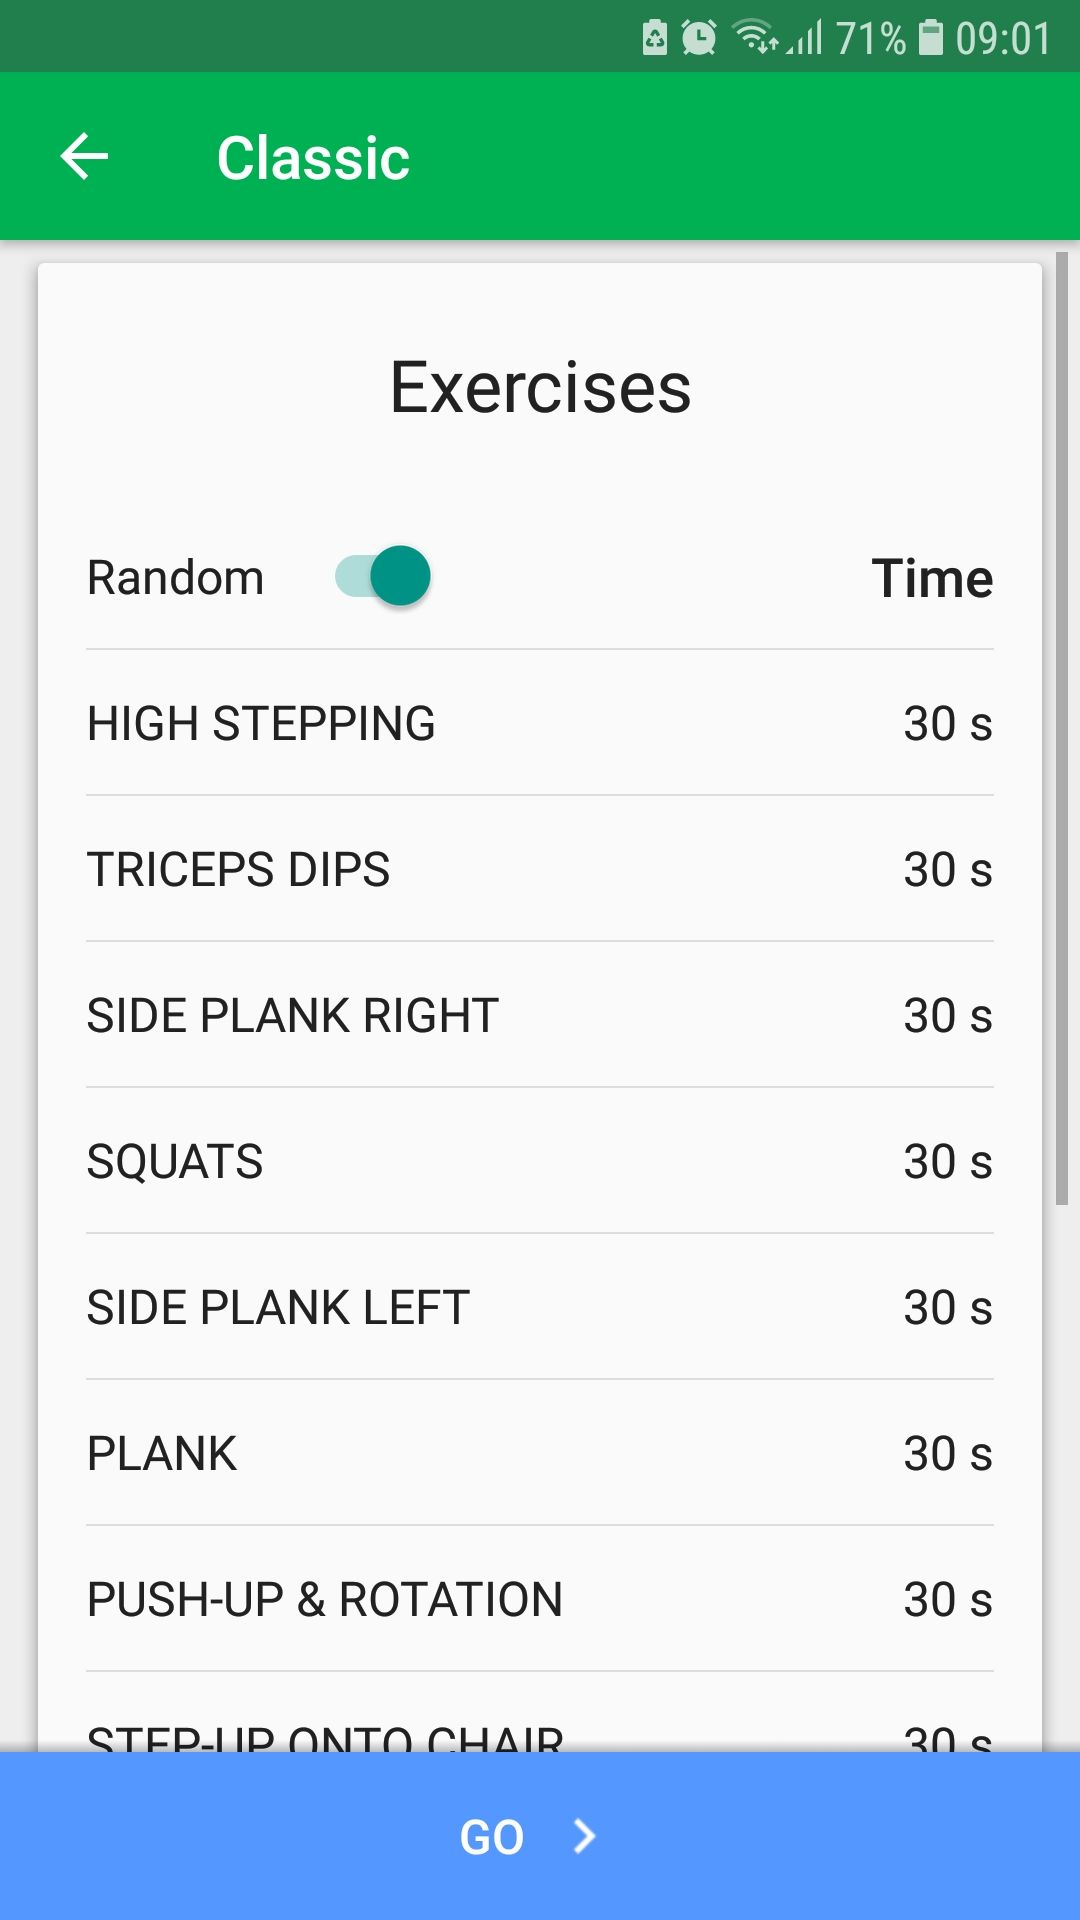 7 MINUTE WORKOUT mobile fitness app classic workouts